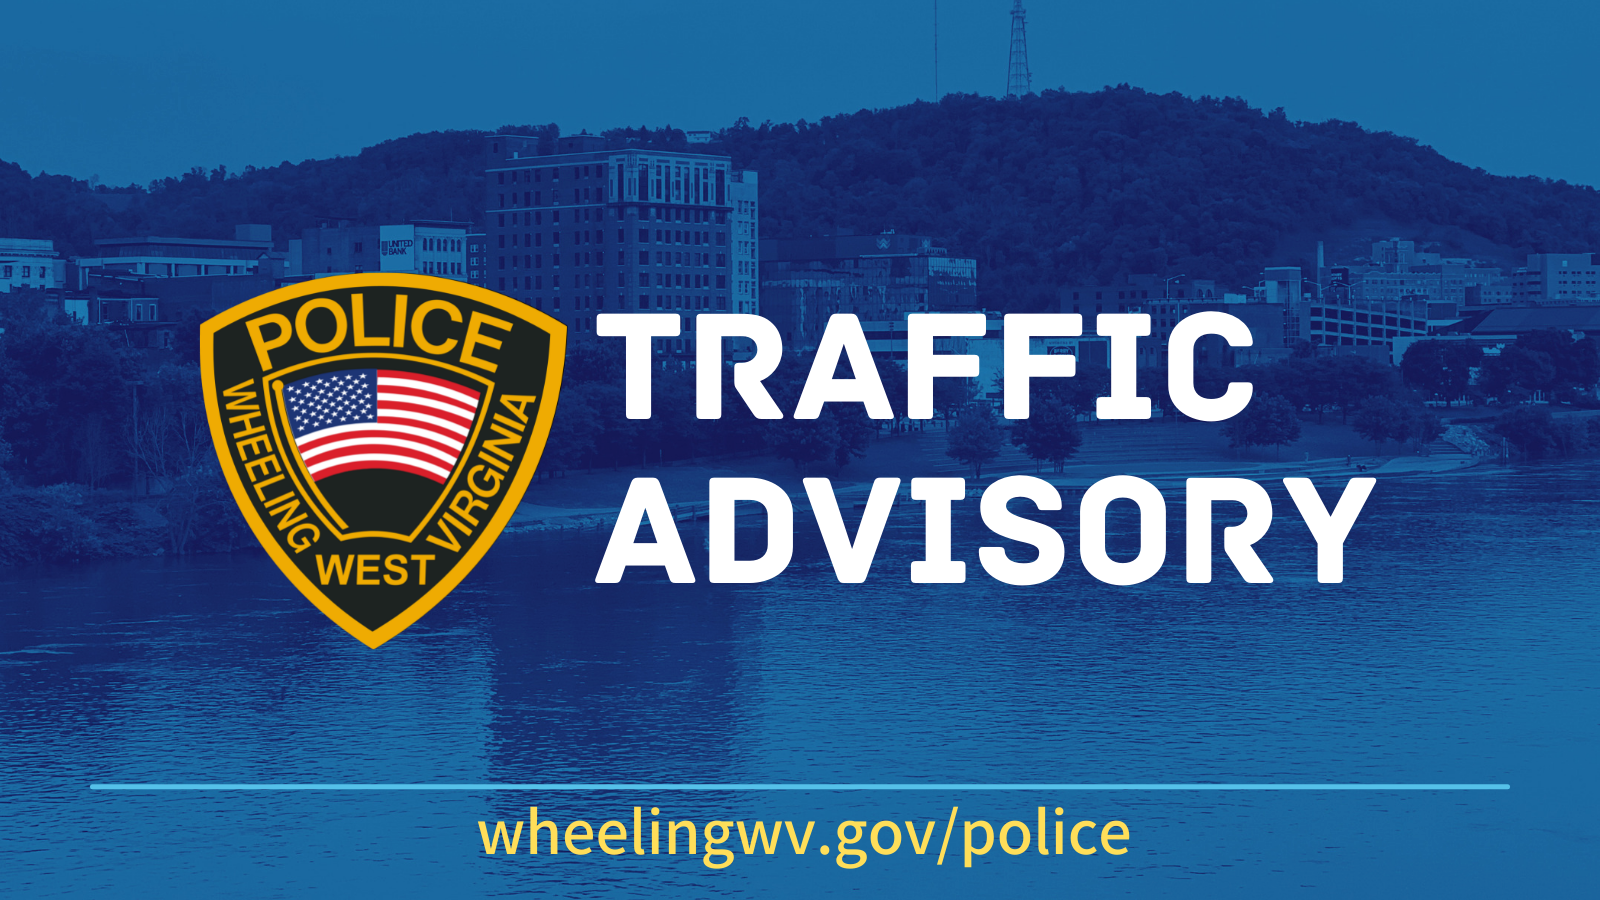  Wheeling Police Remind Public of Travel Restrictions and Safety During Monument Place Bridge Closure 